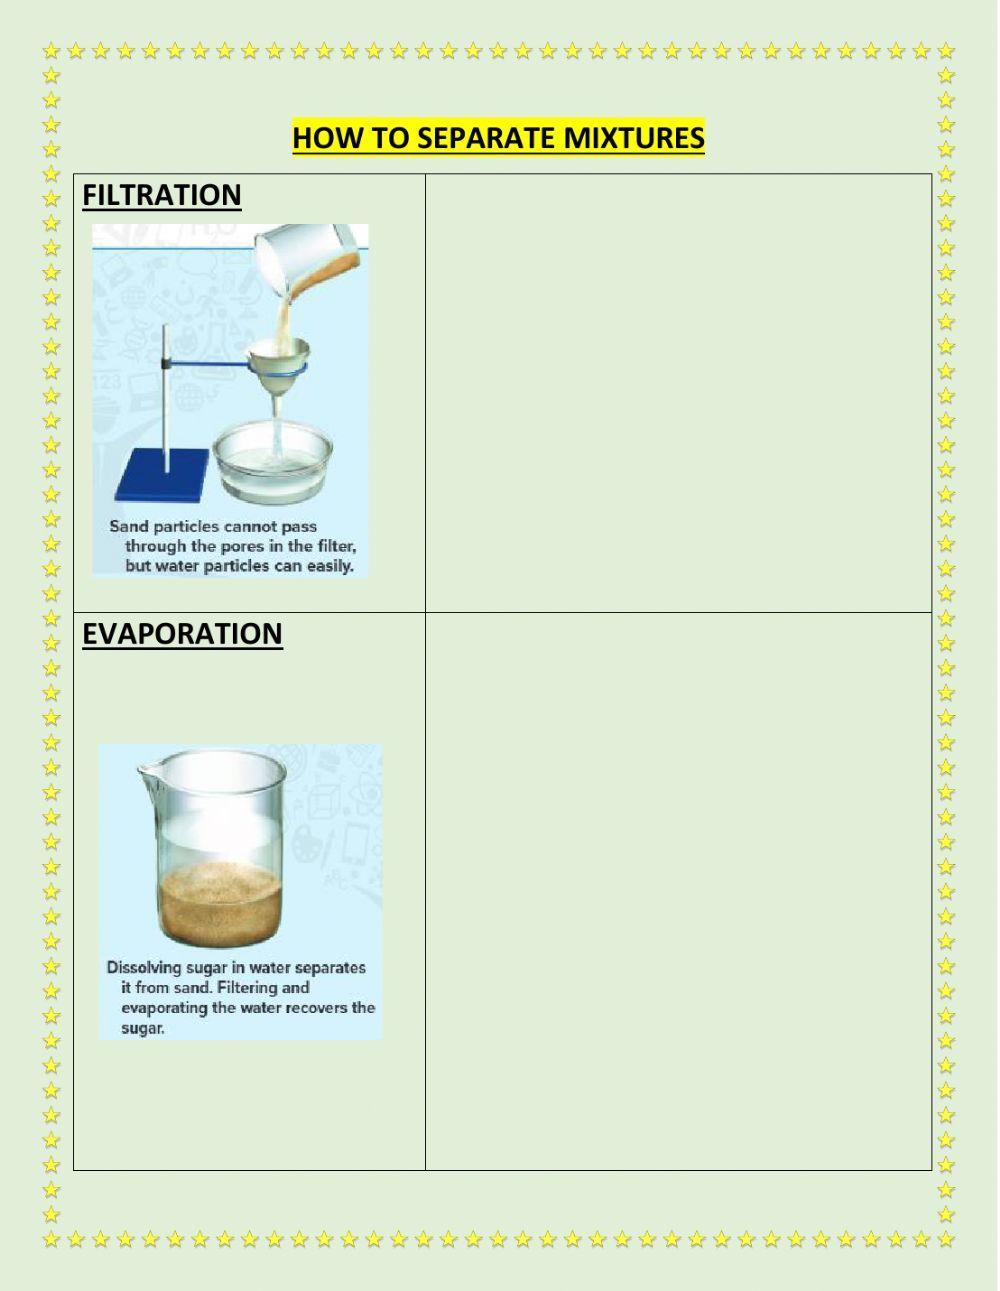 Chapter 6 lesson 4 -MIXTURES